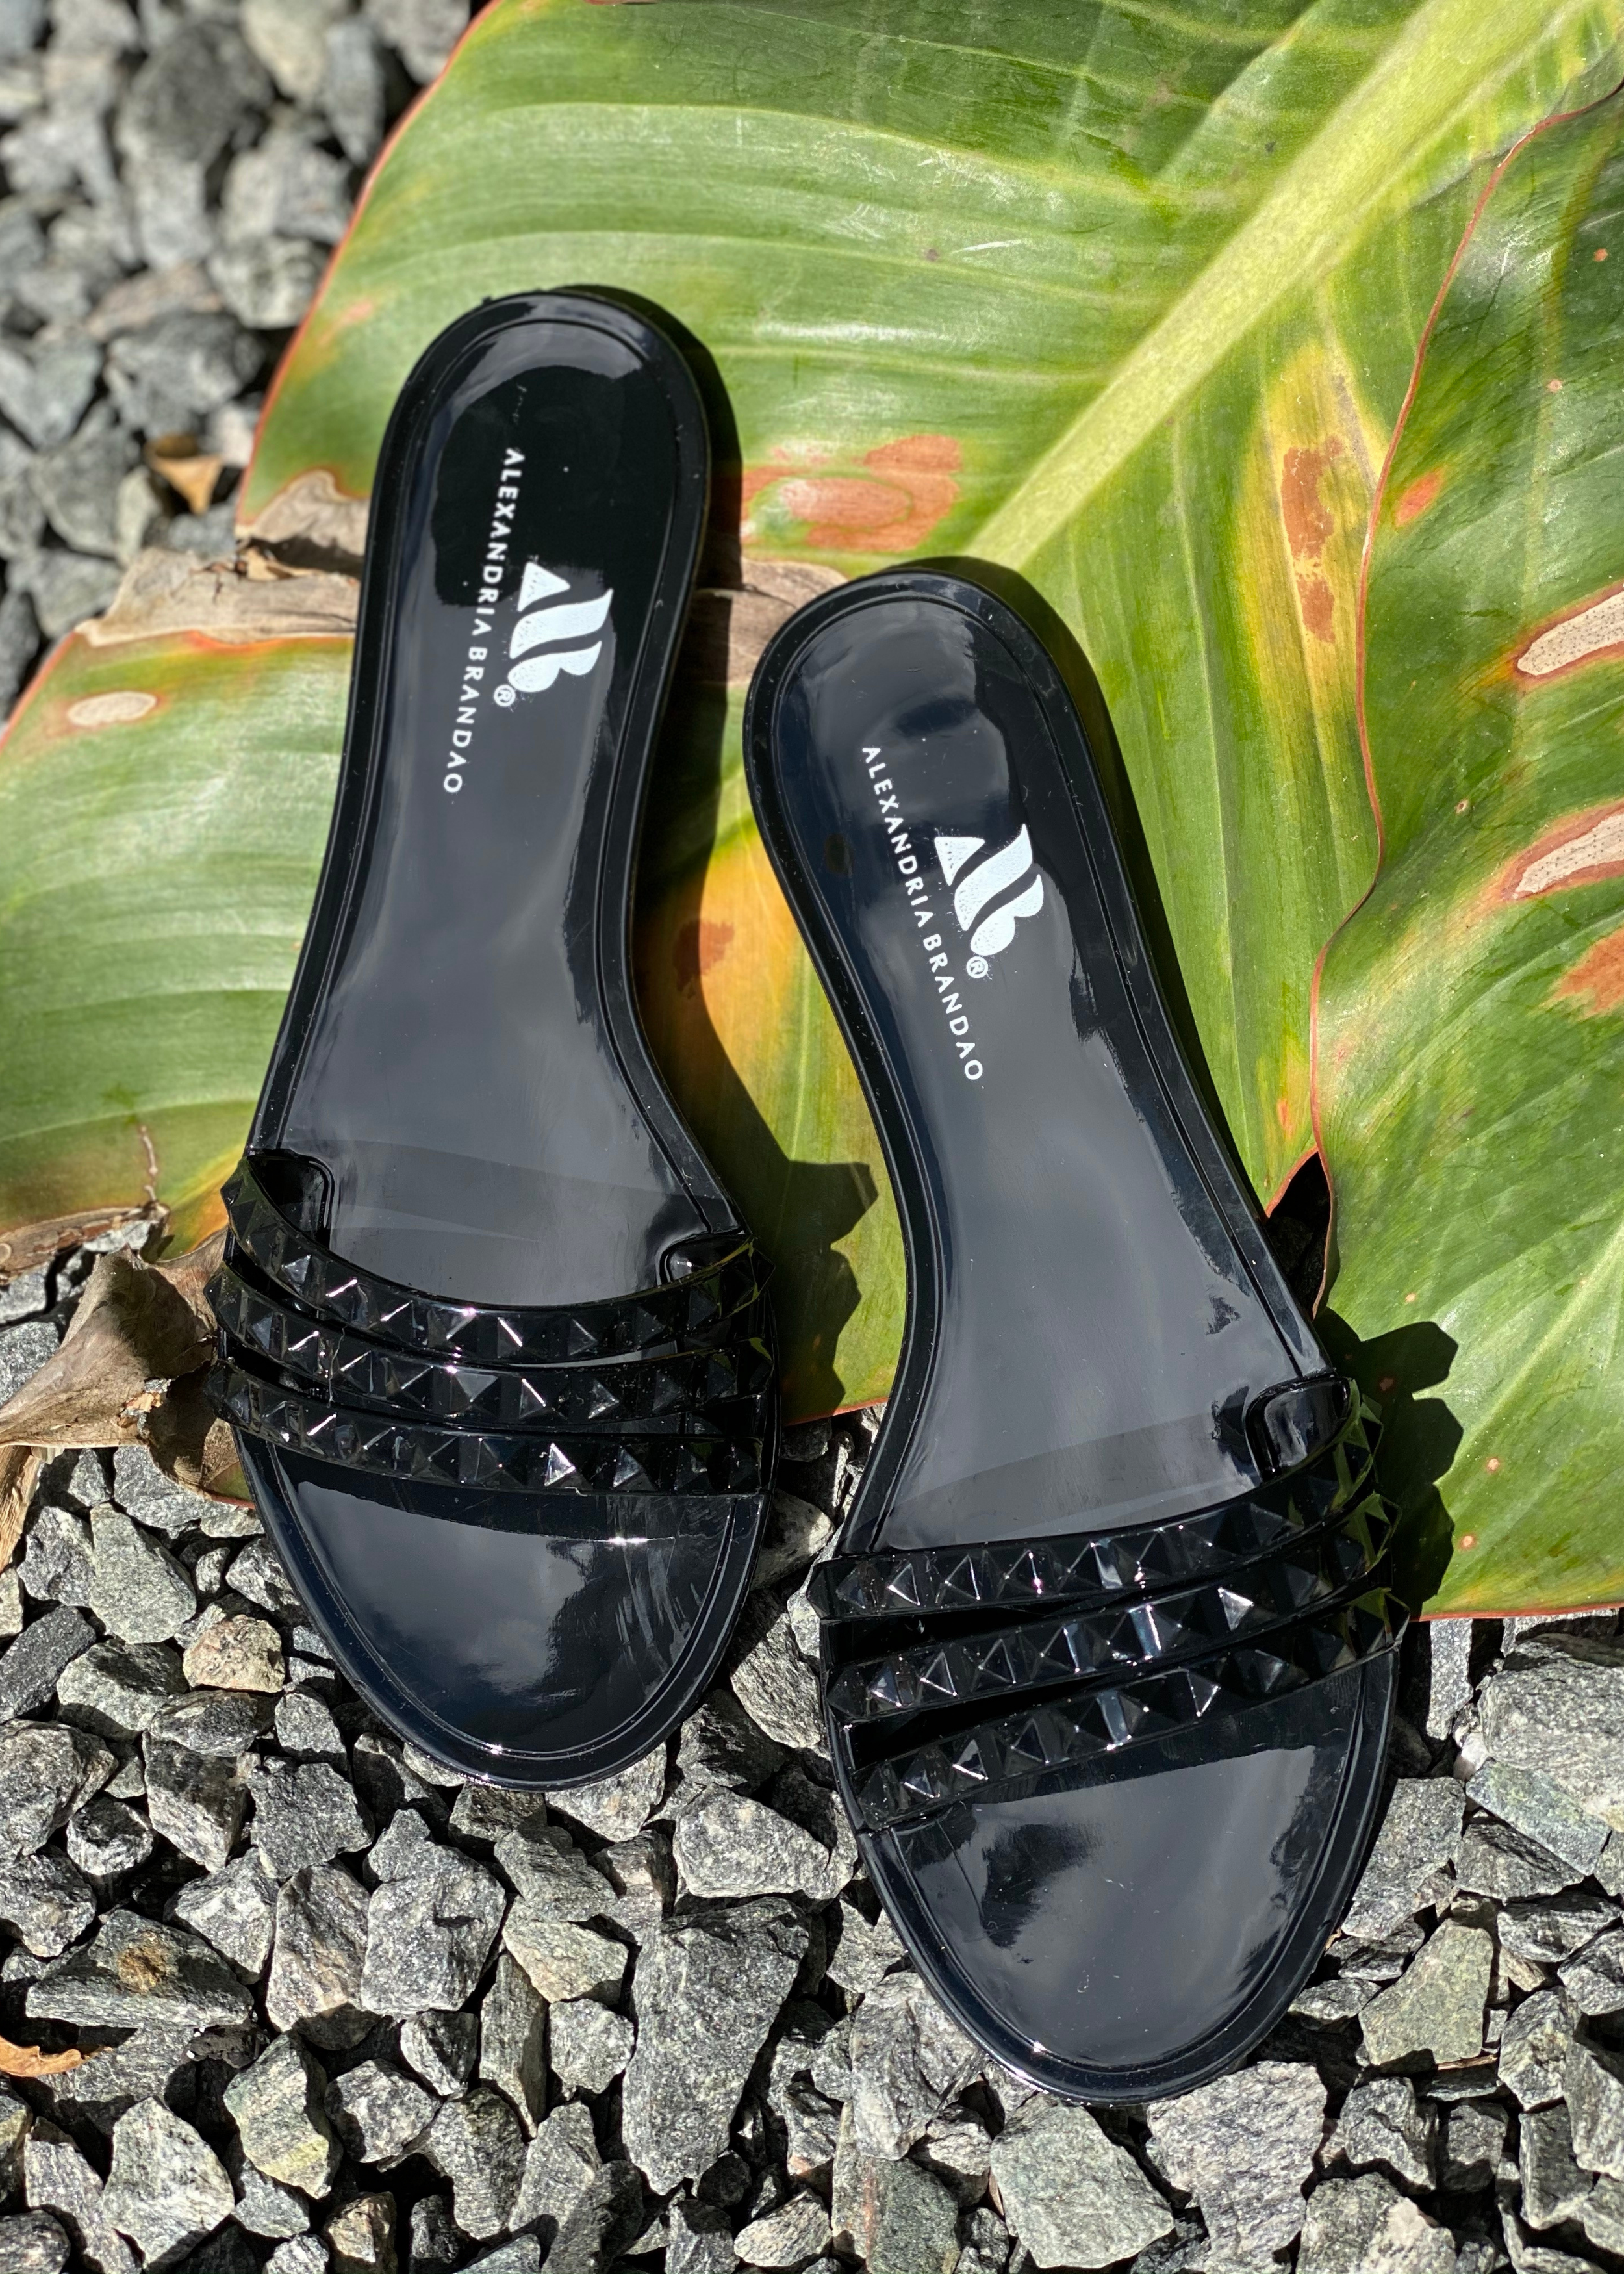 Women's black slides sandals that are waterproof and jelly flip flops for the beach or pool or everyday slides you can use anywhere.